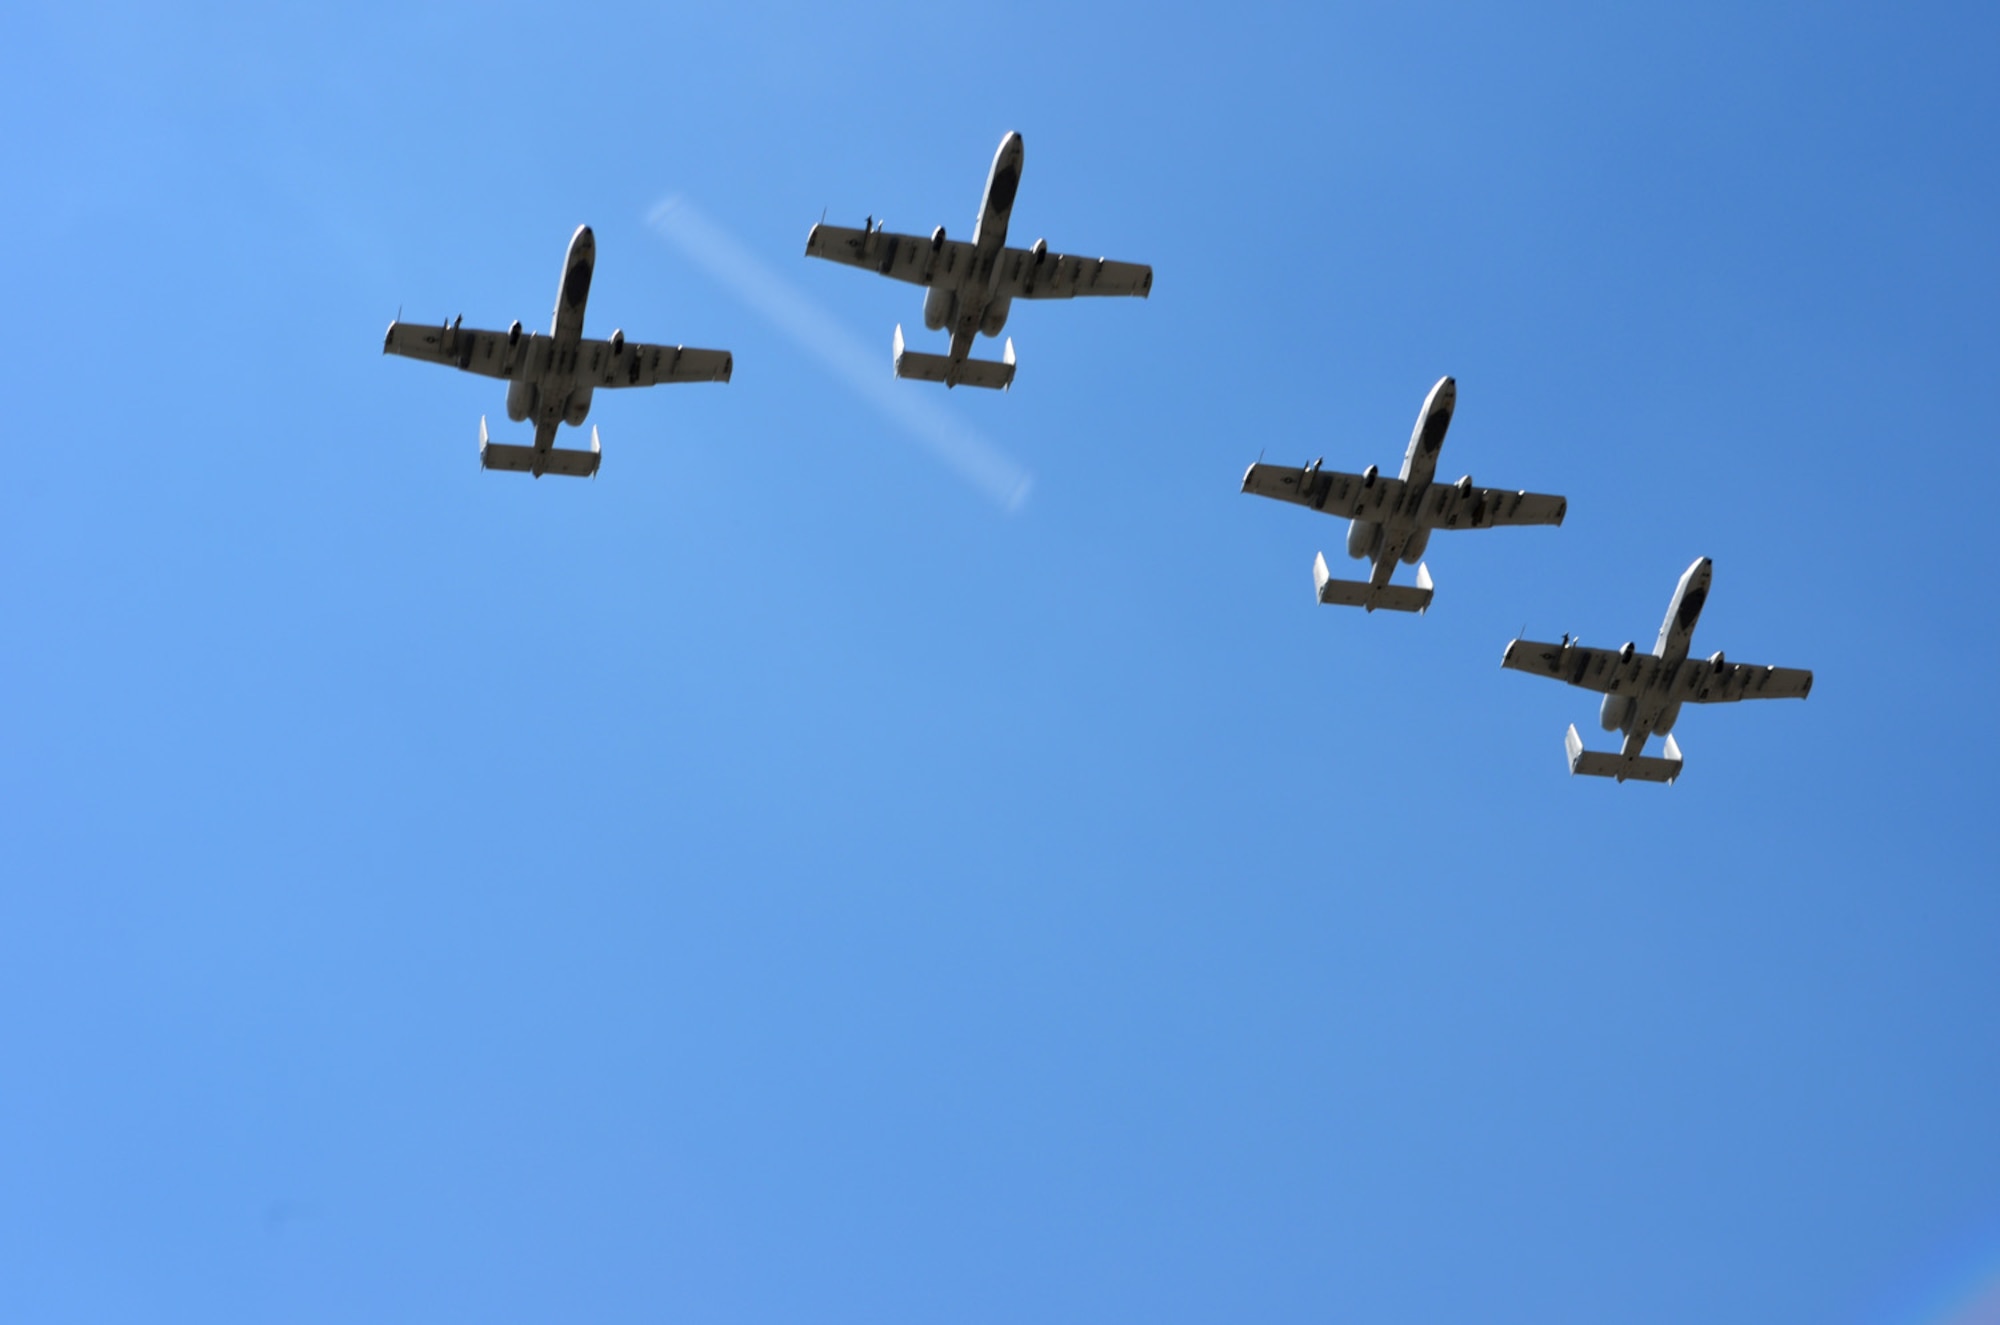 Four A-10 Thunderbolt’s with the 303rd Fighter Squadron, Whiteman Air Force Base, Missouri, perform a fly-over for Capt. Kyle Babbit, 303d Fighter Squadron A-10 Thunderbolt II pilot, at the Air Force Academy May 1. Babbit received The Jabara Award for Airmanship for his selfless actions while deployed downrange September 2013 – October 2014. (U.S. Air Force photo by Capt. Denise Haeussler)
